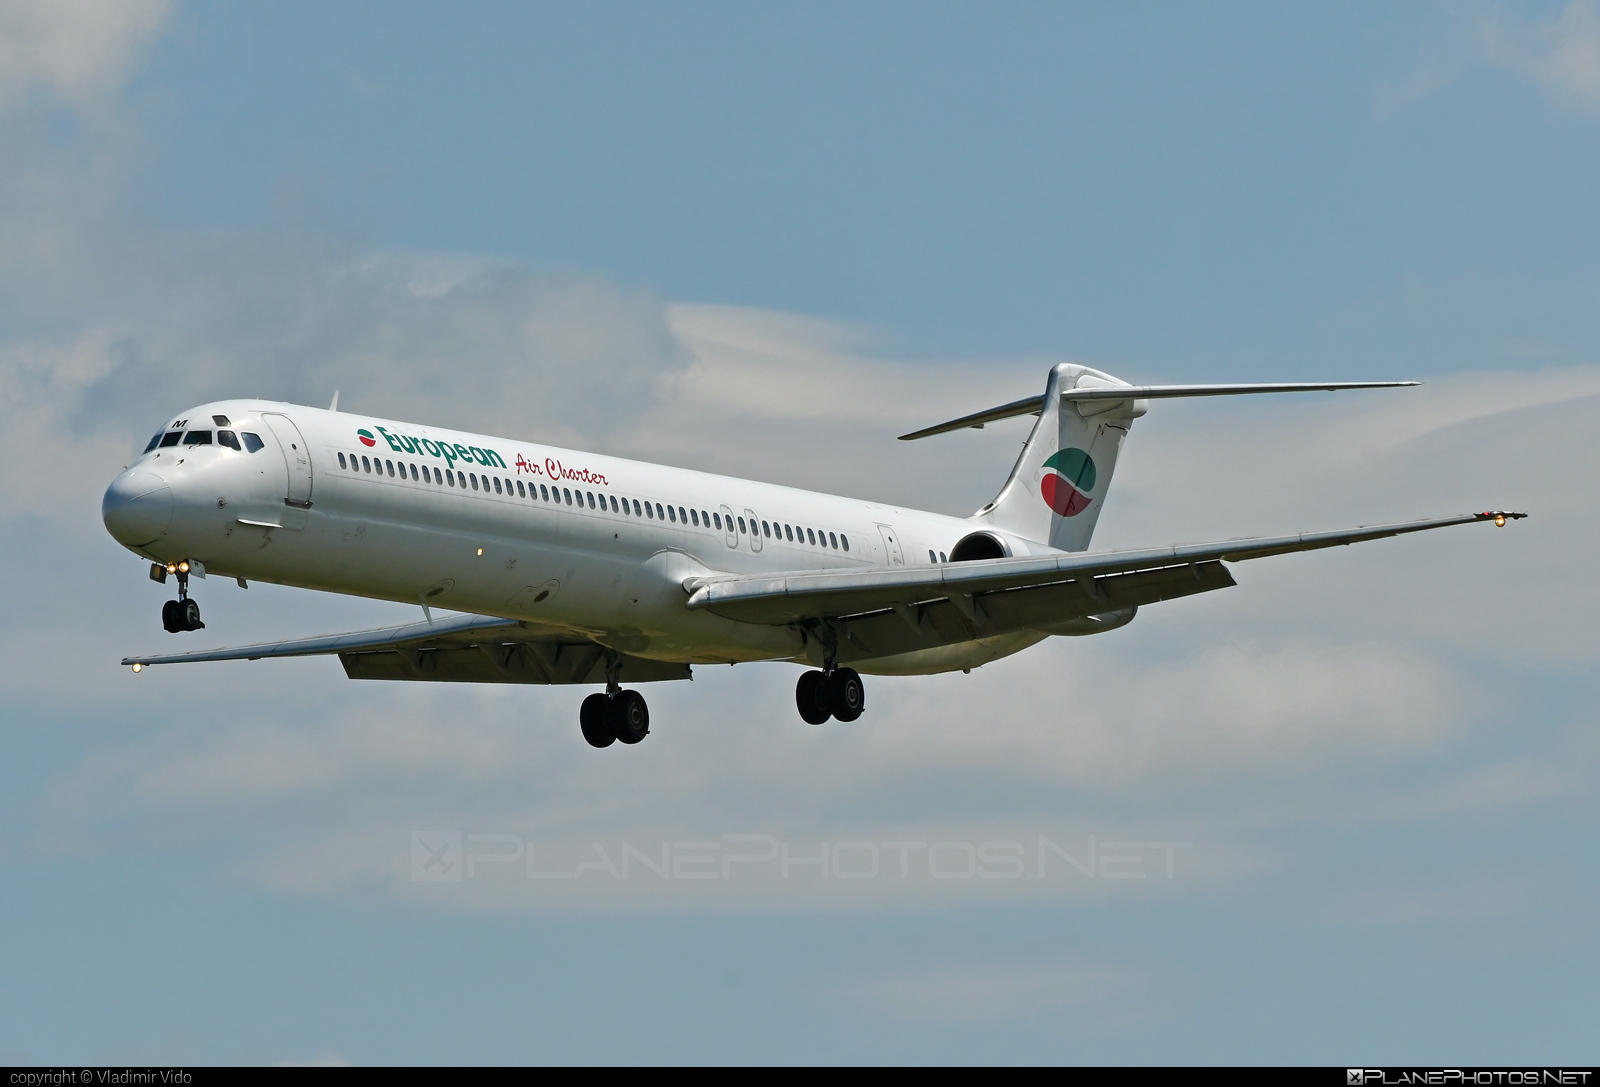 McDonnell Douglas MD-82 - LZ-LDM operated by European Air Charter #EuropeanAirCharter #mcDonnellDouglas #mcdonnelldouglas80 #mcdonnelldouglas82 #mcdonnelldouglasmd80 #mcdonnelldouglasmd82 #md80 #md82